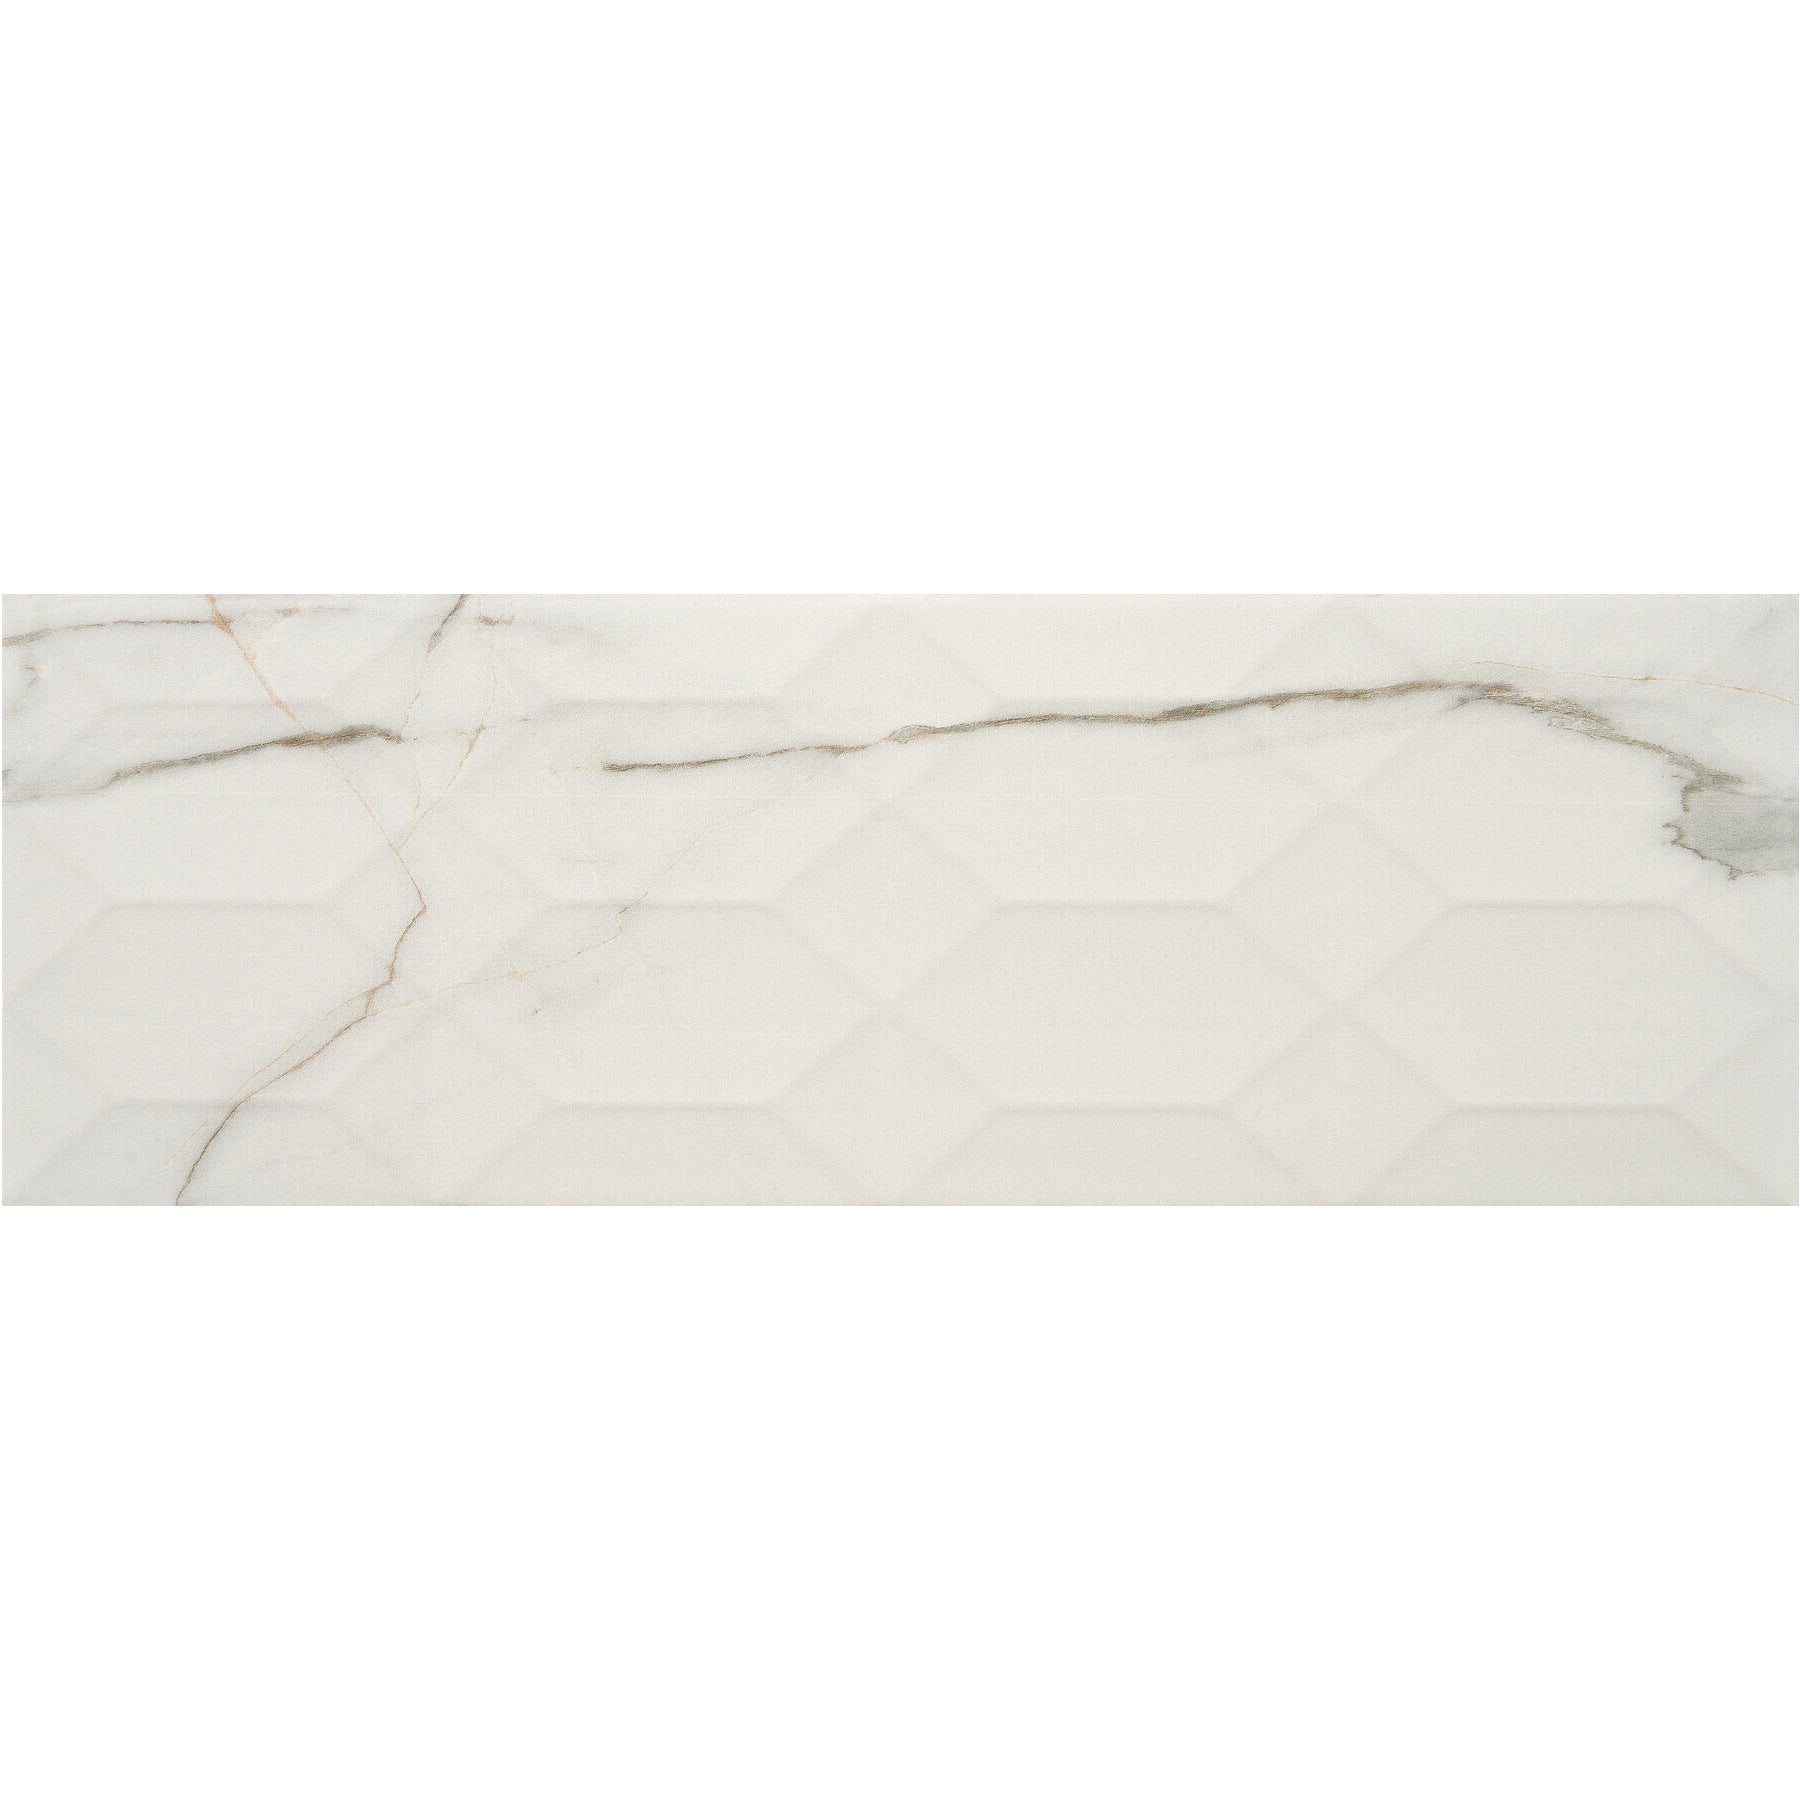 American Olean - Mythique Marble 8 in. x 24 in. Glazed Ceramic Wall Tile - Calacatta Venecia